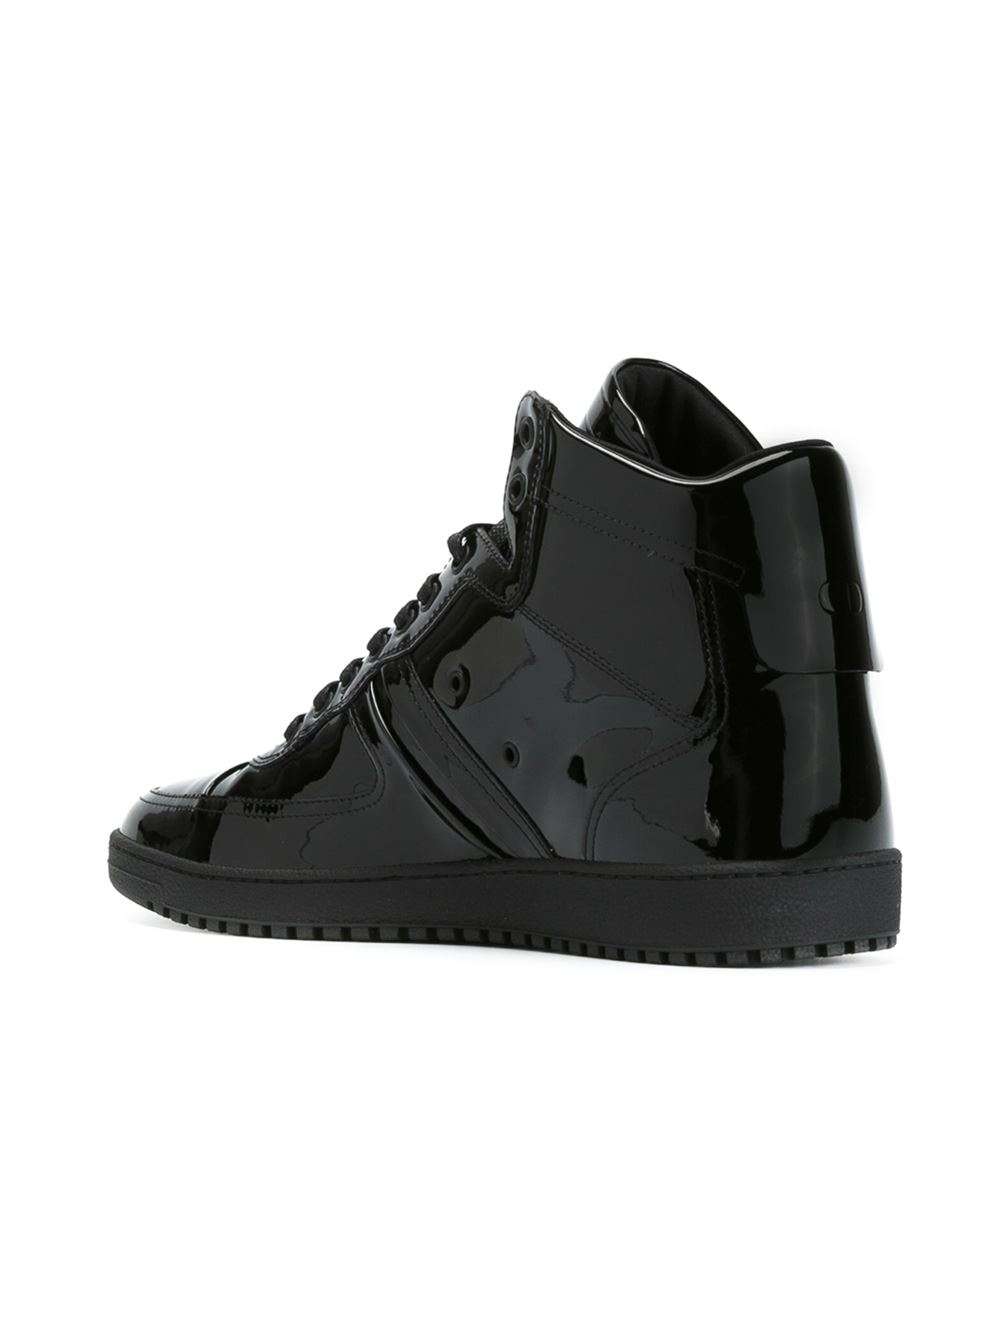 Dior Homme Classic Leather High